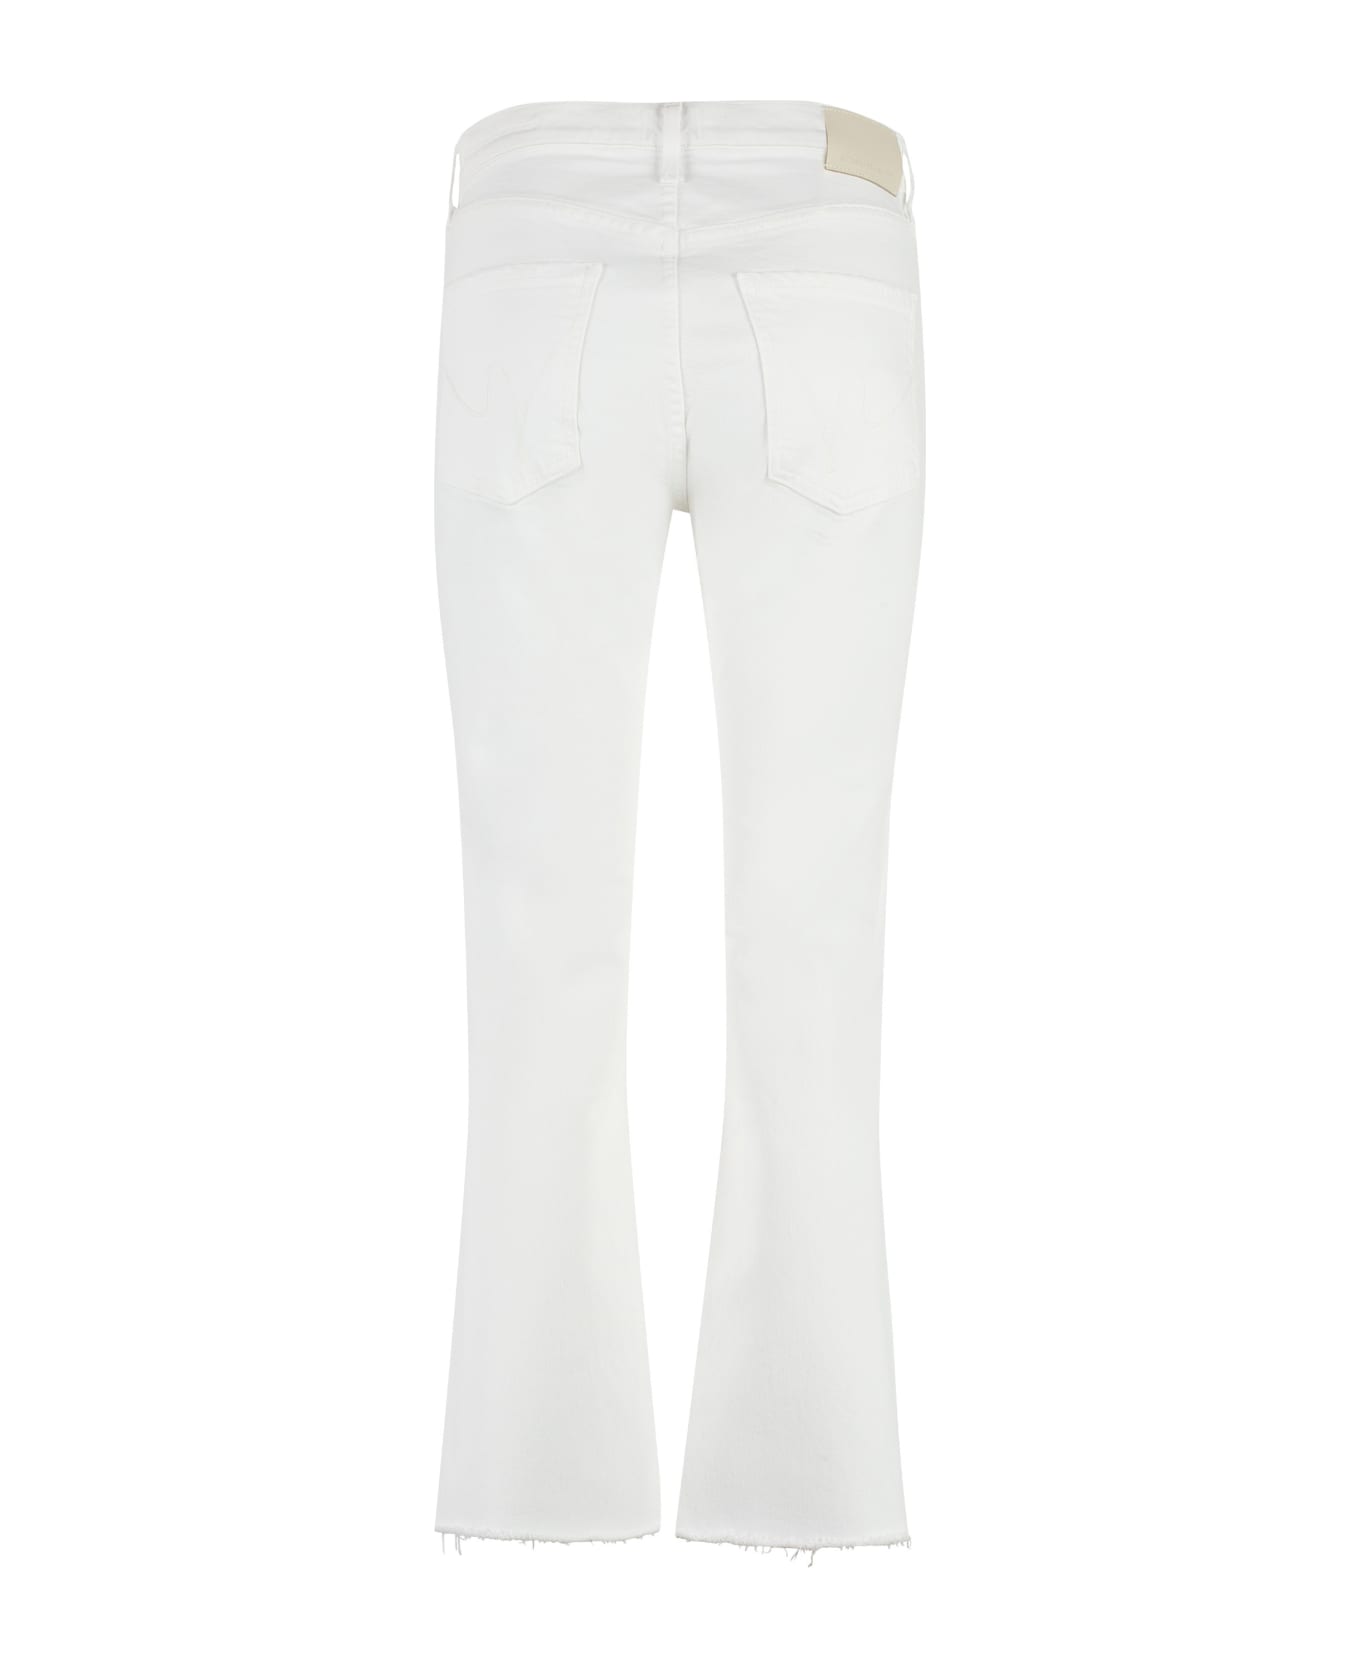 Citizens of Humanity Isola Jeans - MAYFAIR WHITE